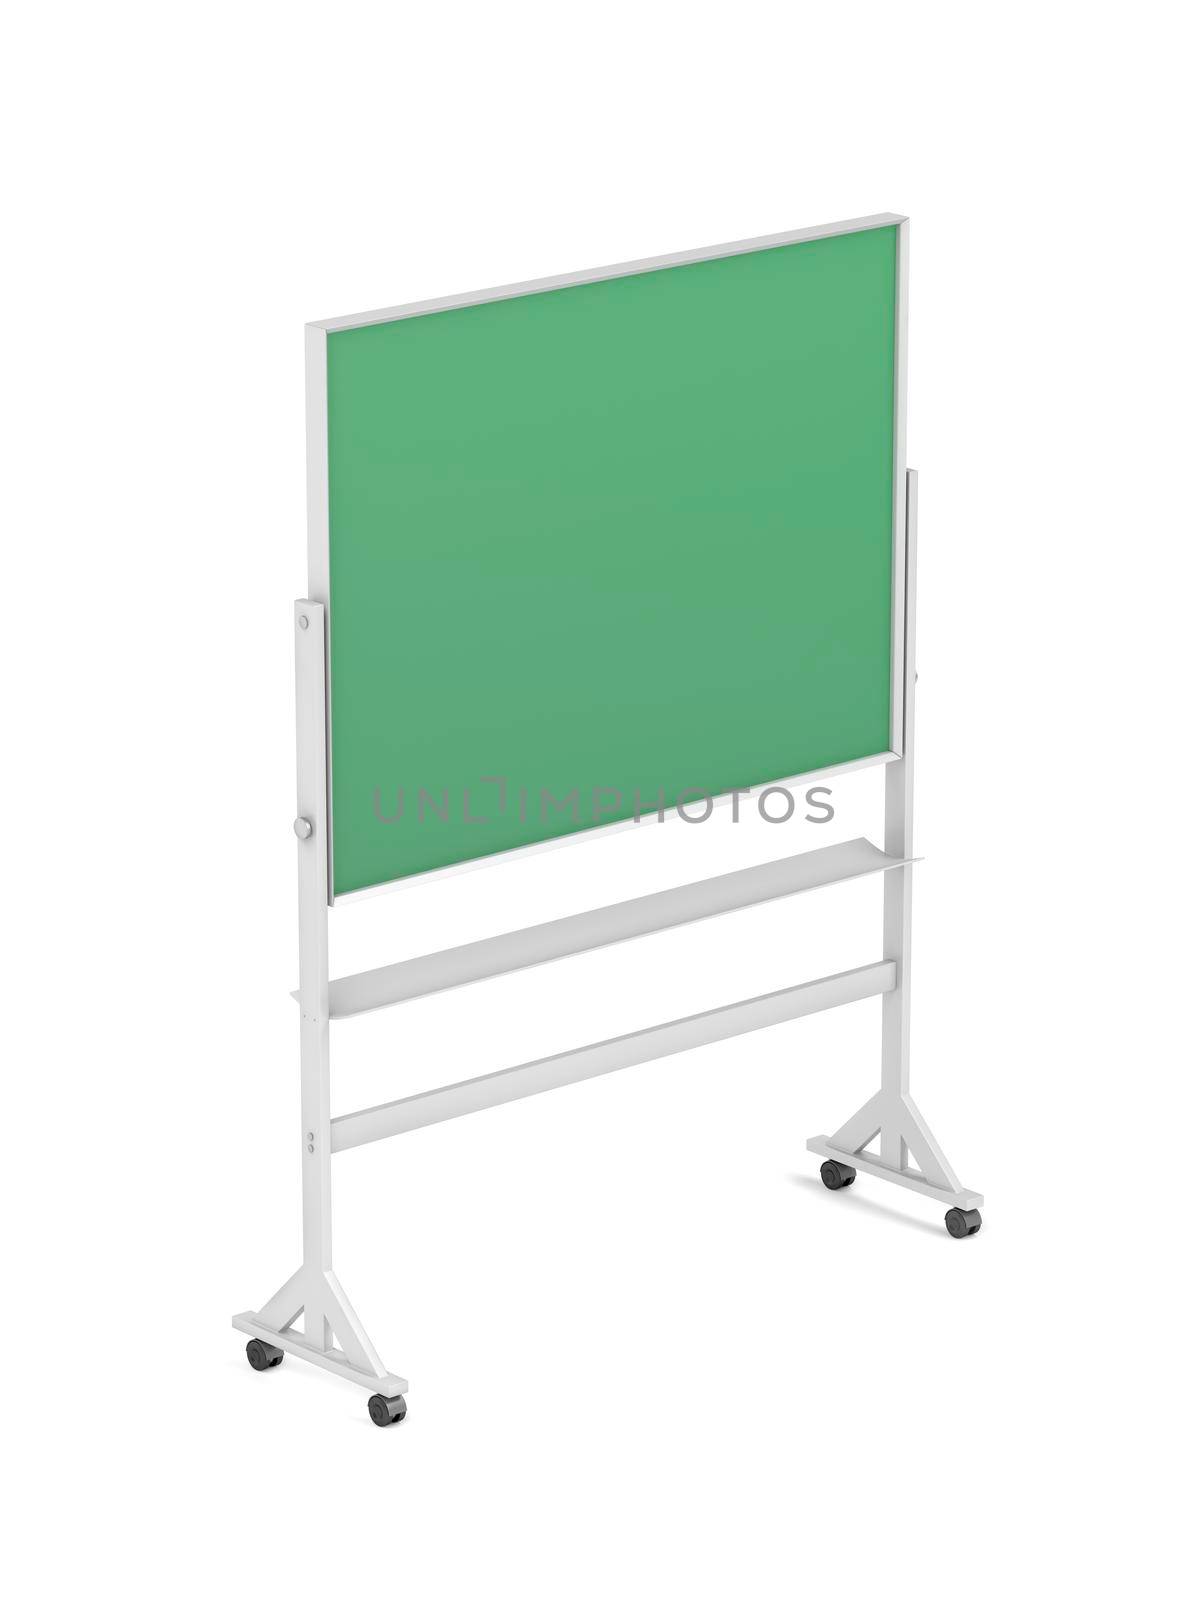 Mobile green chalkboard by magraphics